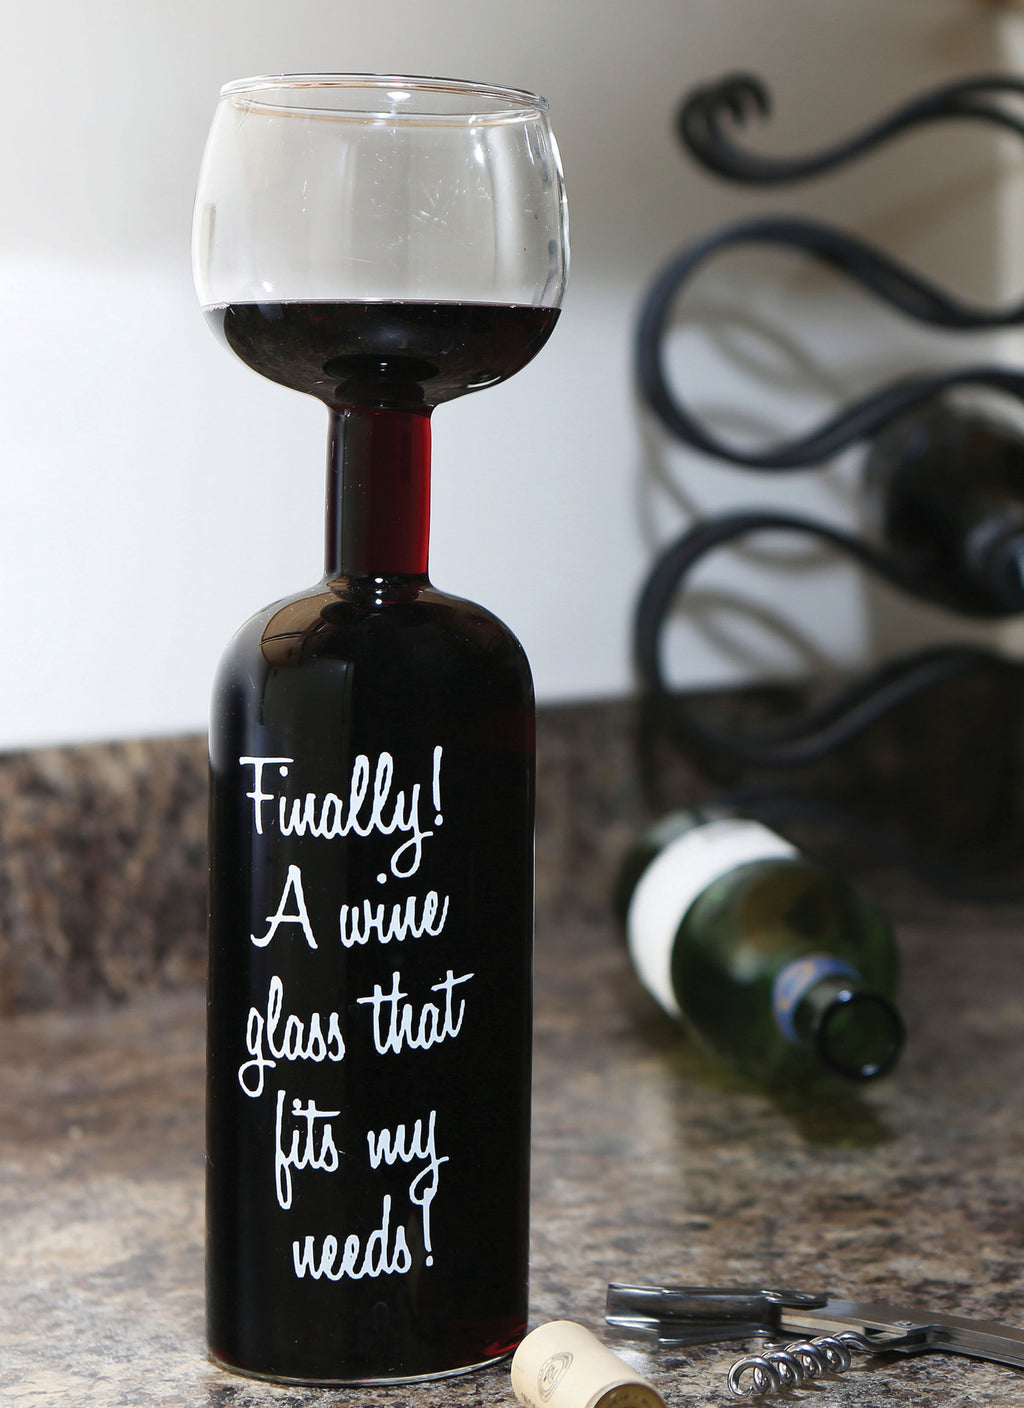 Fancy Wine Cocktail Glass with Built-in Straw – wine-store-accessories